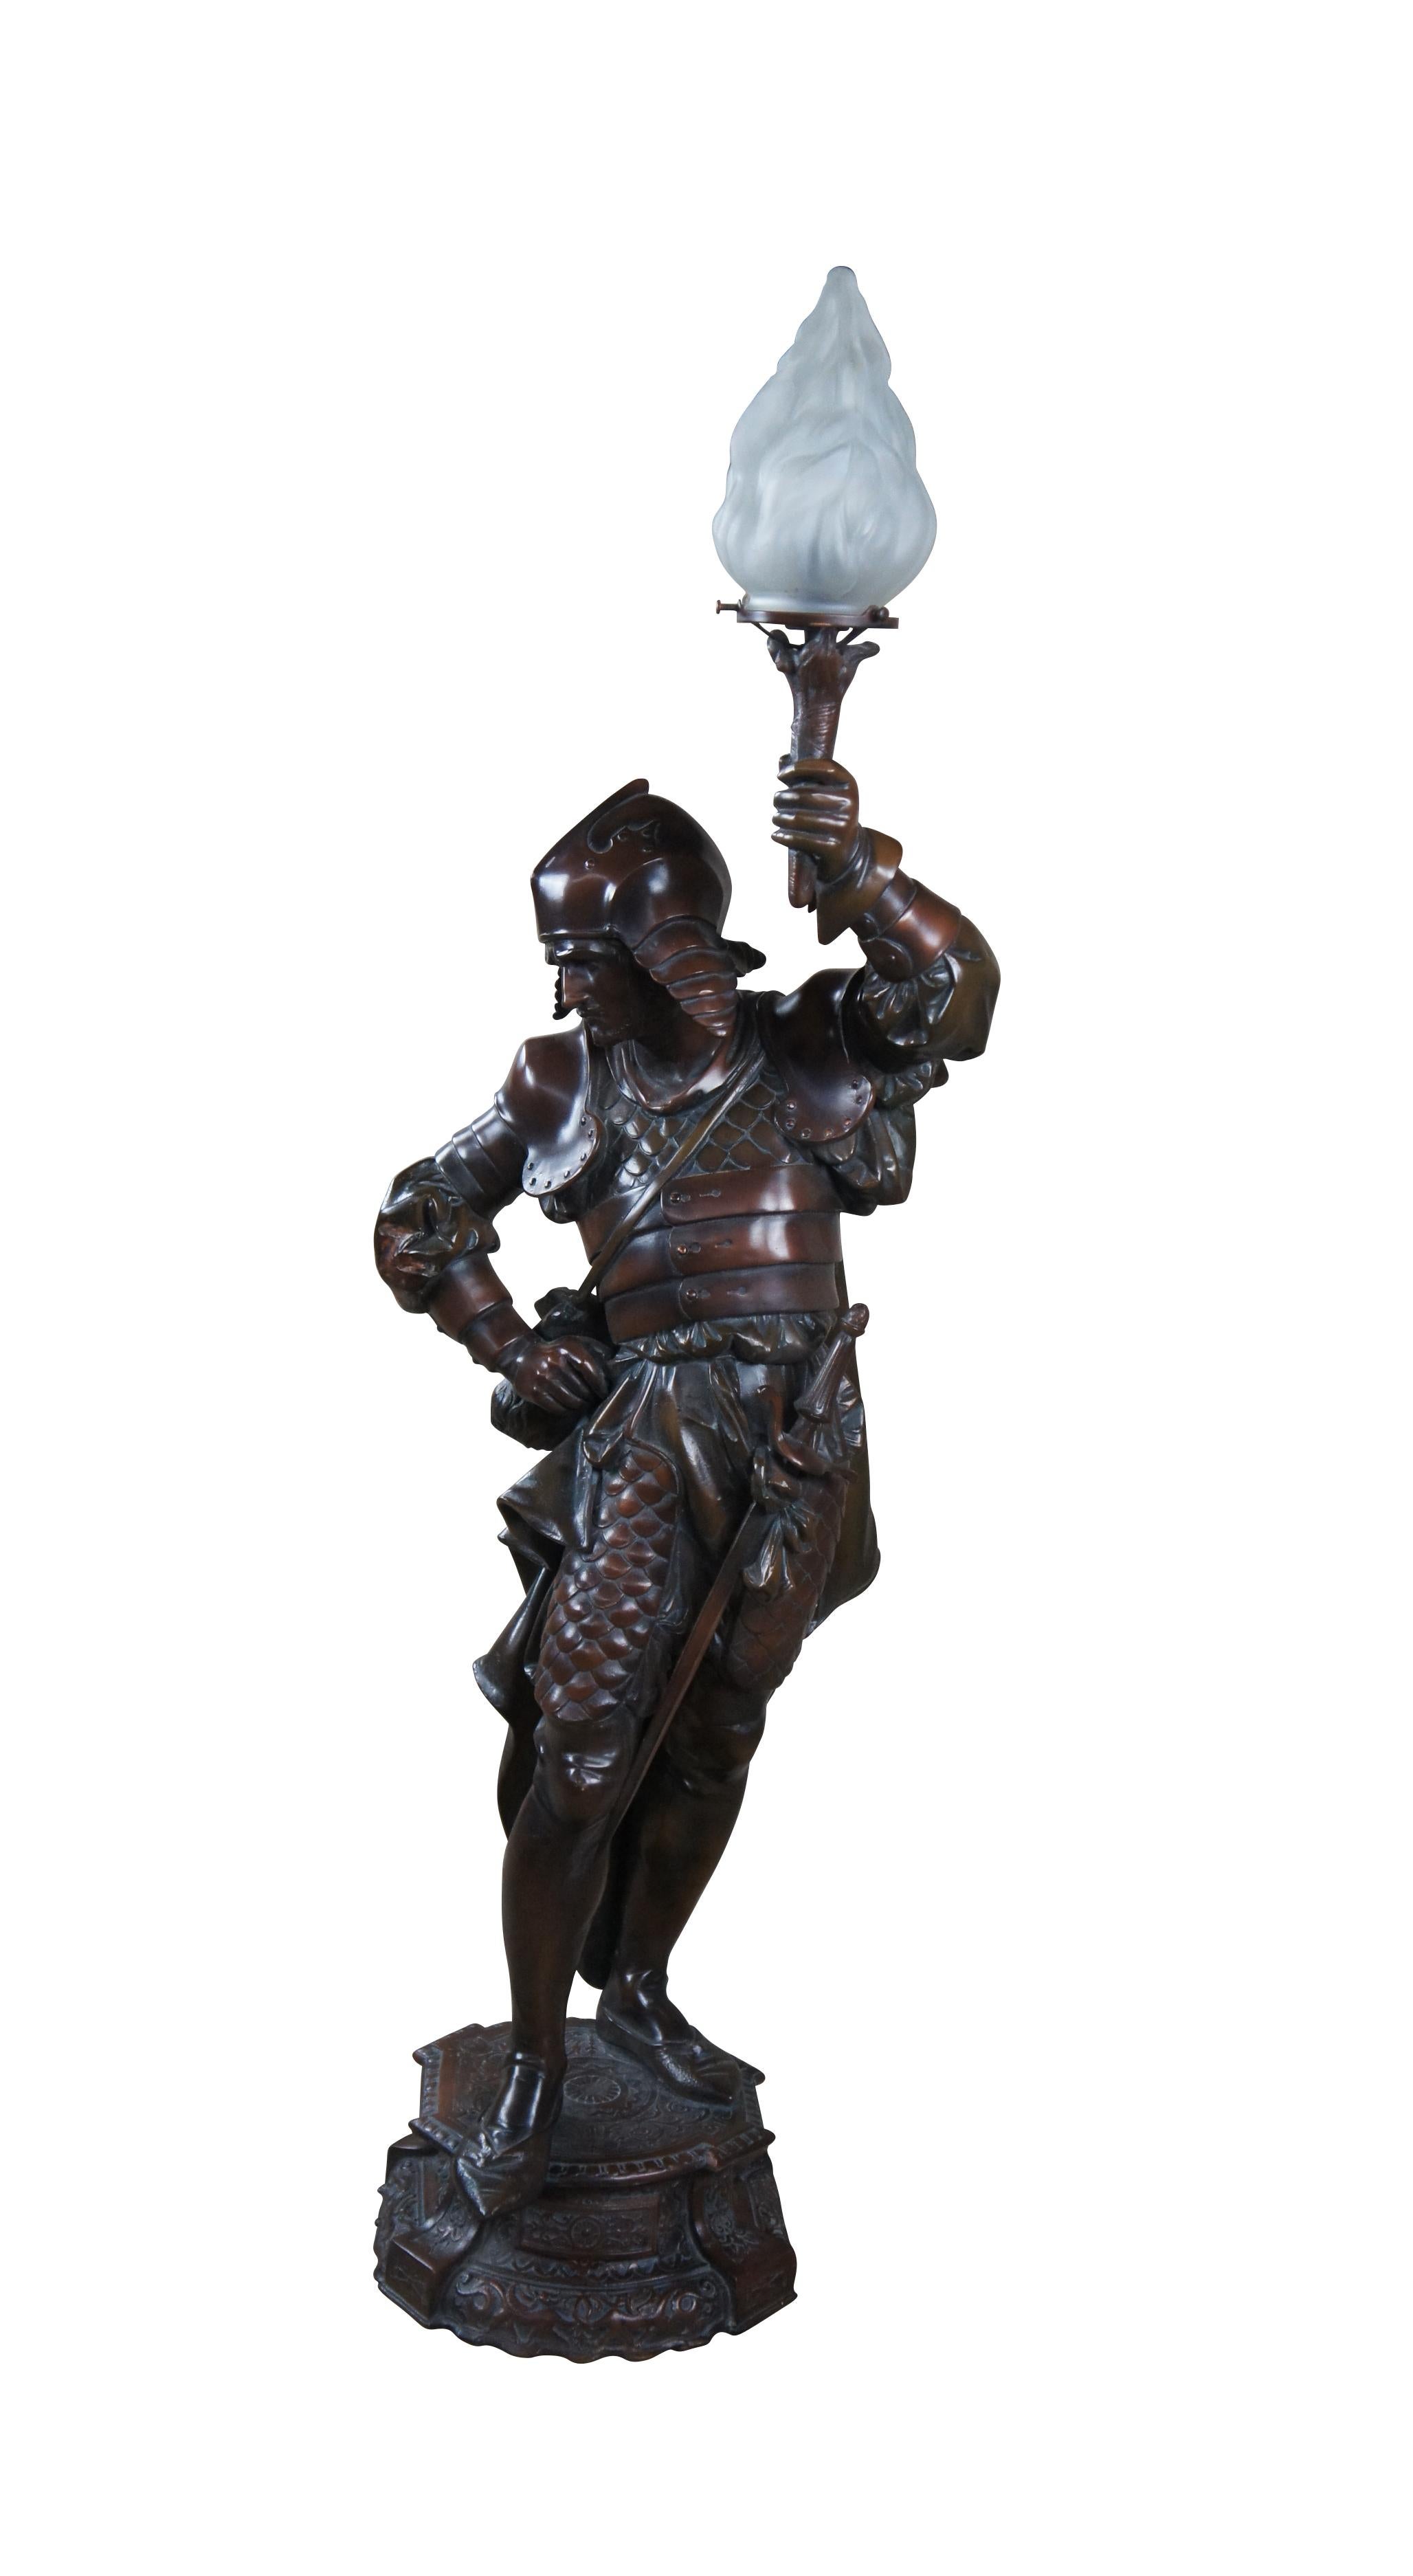 A large French early 20th century Newel Post or Floor Lamp.  Features a bronzed spelter figure in the form of a 16th century warrior or knight in full armour and draped cloaks with flambeau shade.

The  warrior is holding a torch with opaque